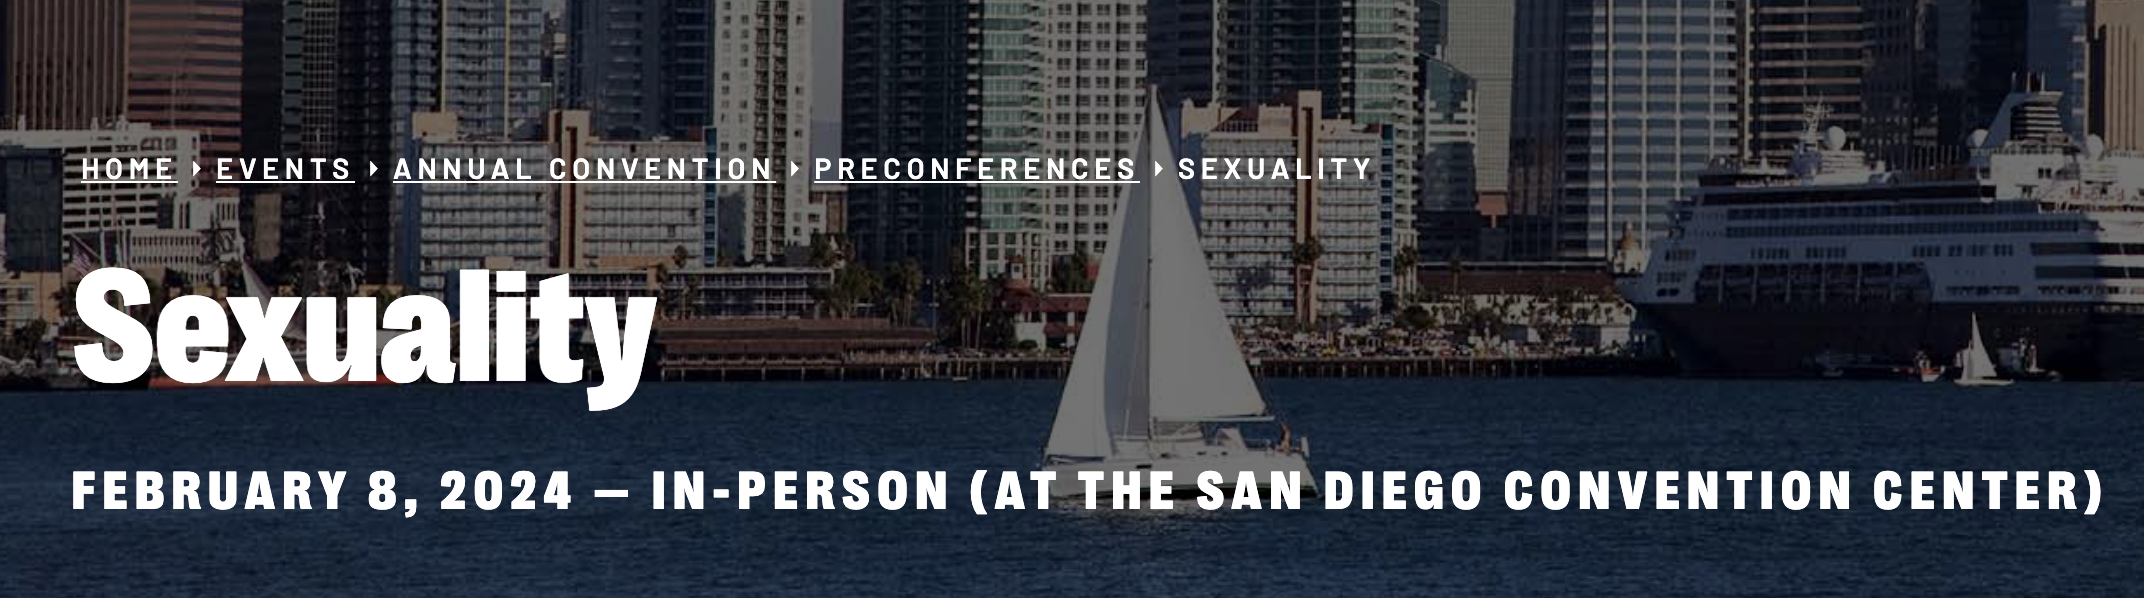 Announcing the 11th Annual SPSP Sexuality Pre-Conference!